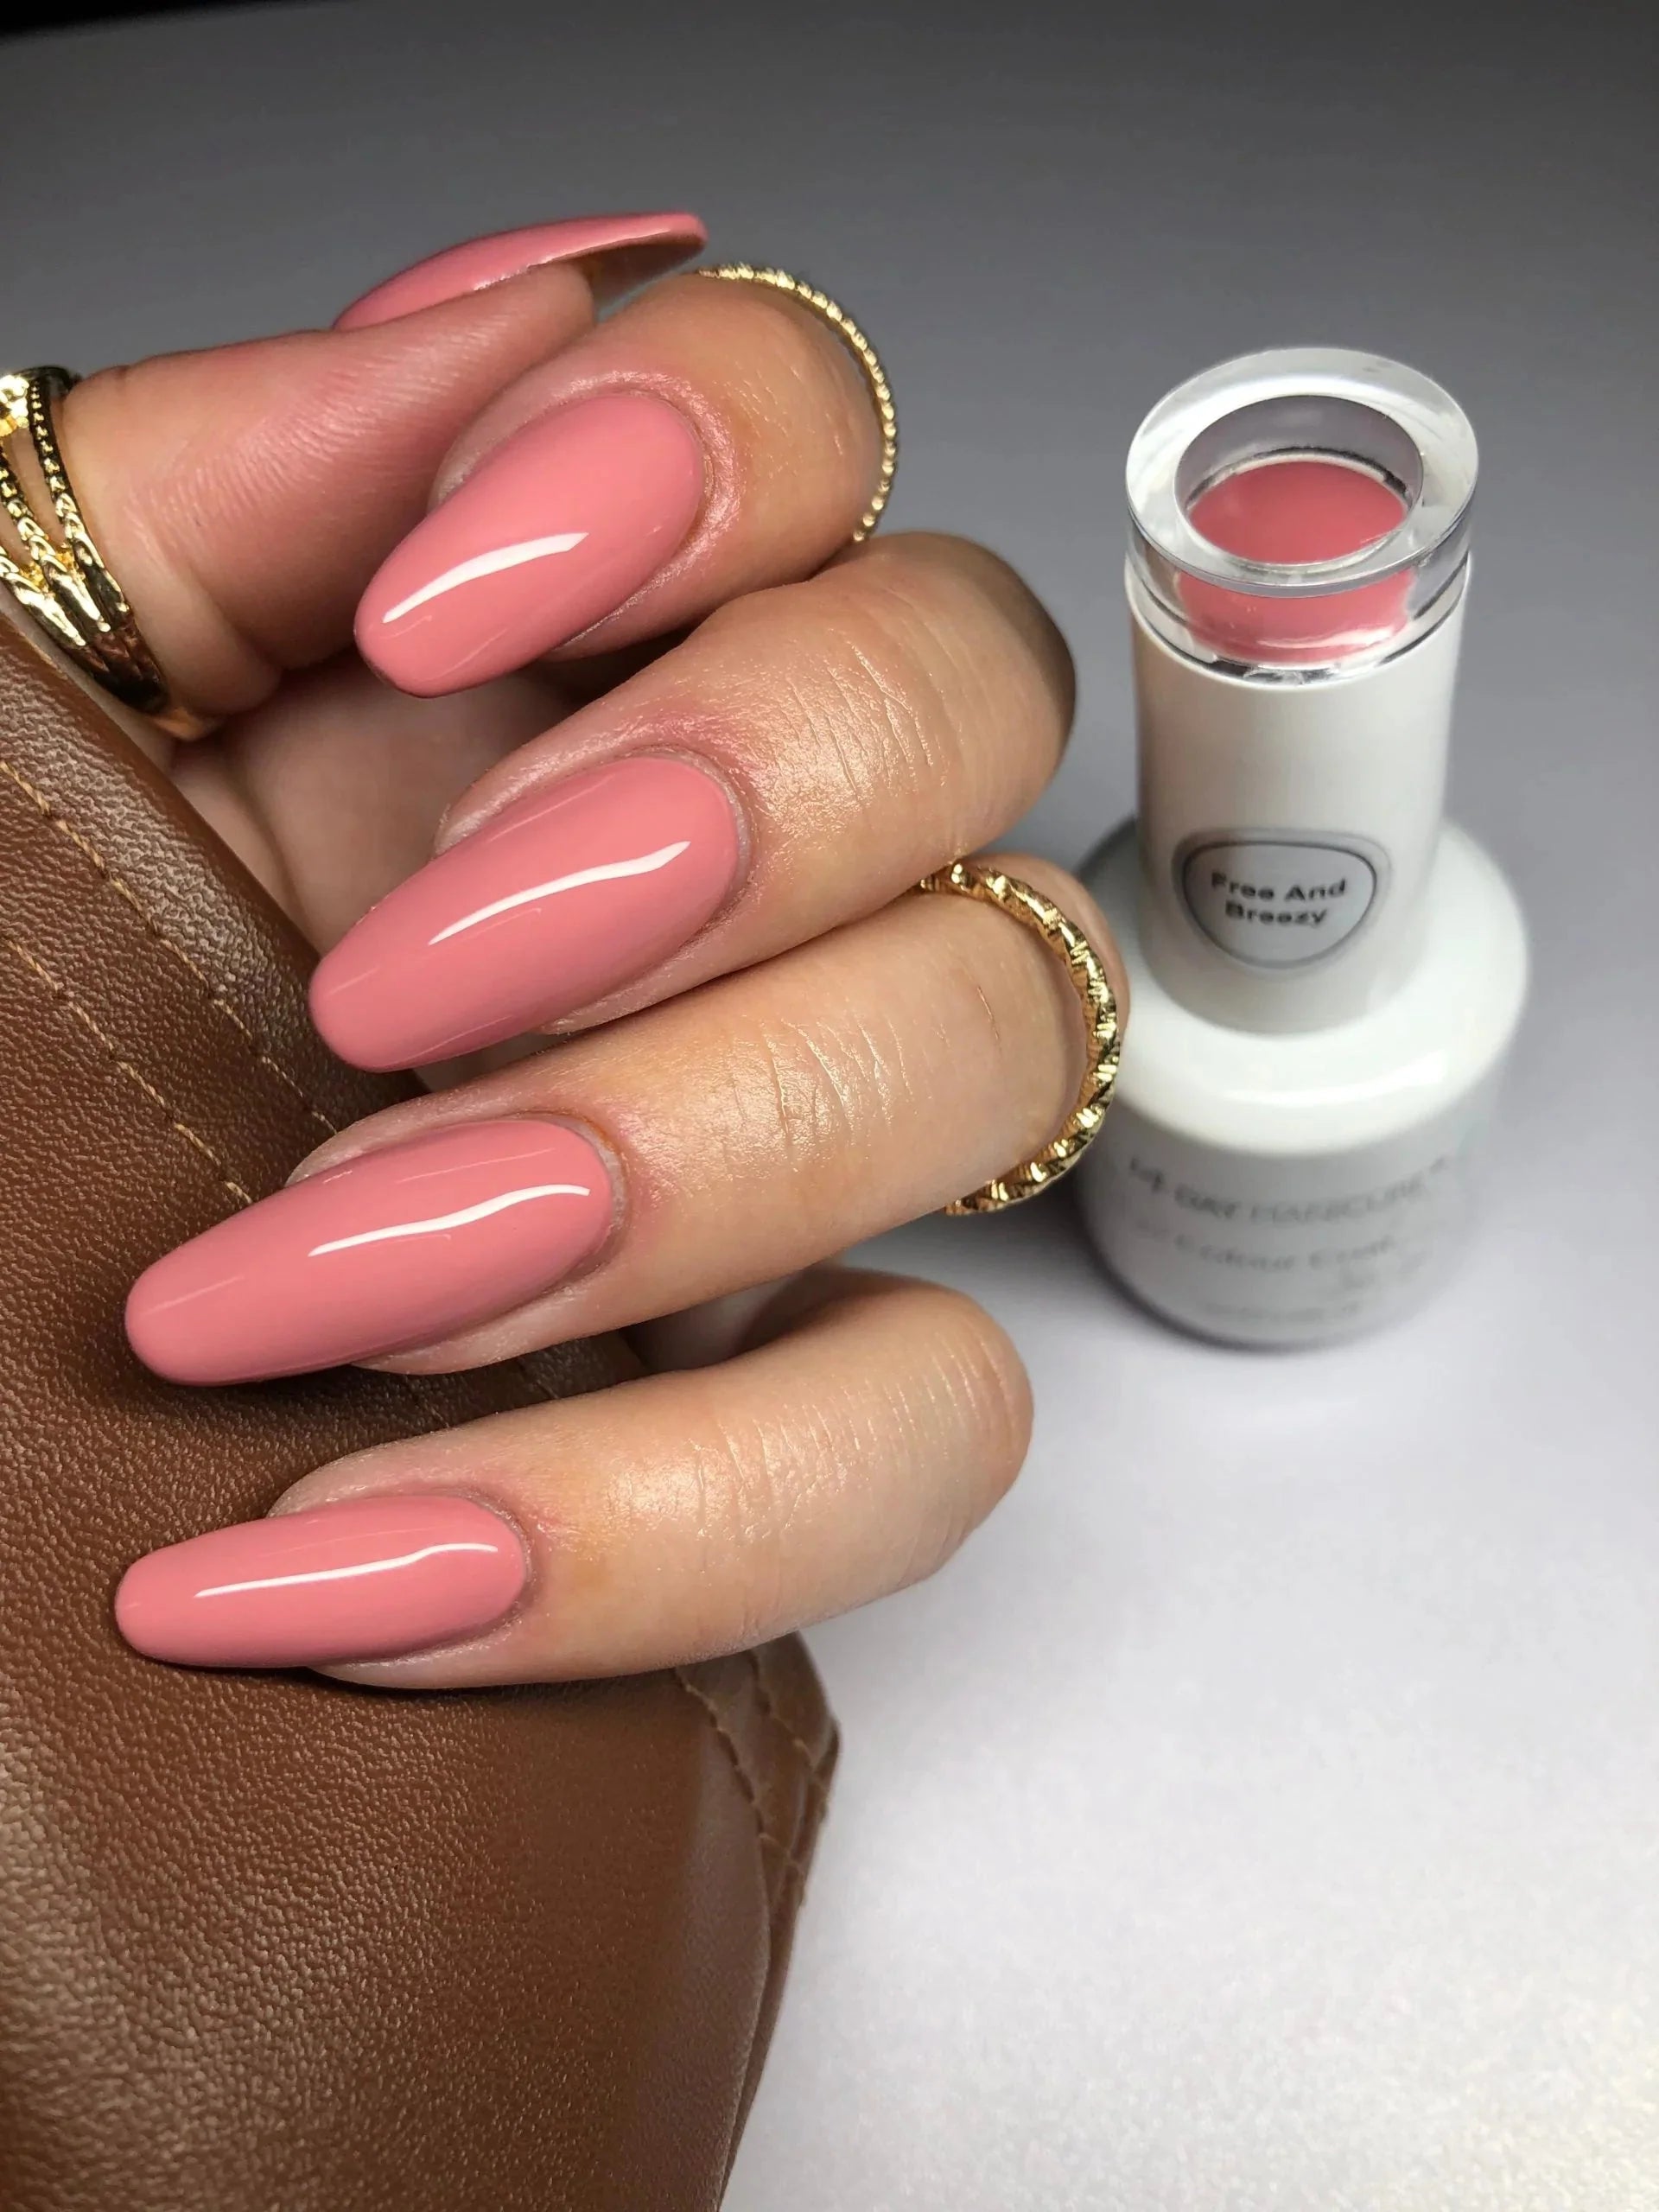 Free and Breezy - Gel Polish - 14 Day Manicure - 4 